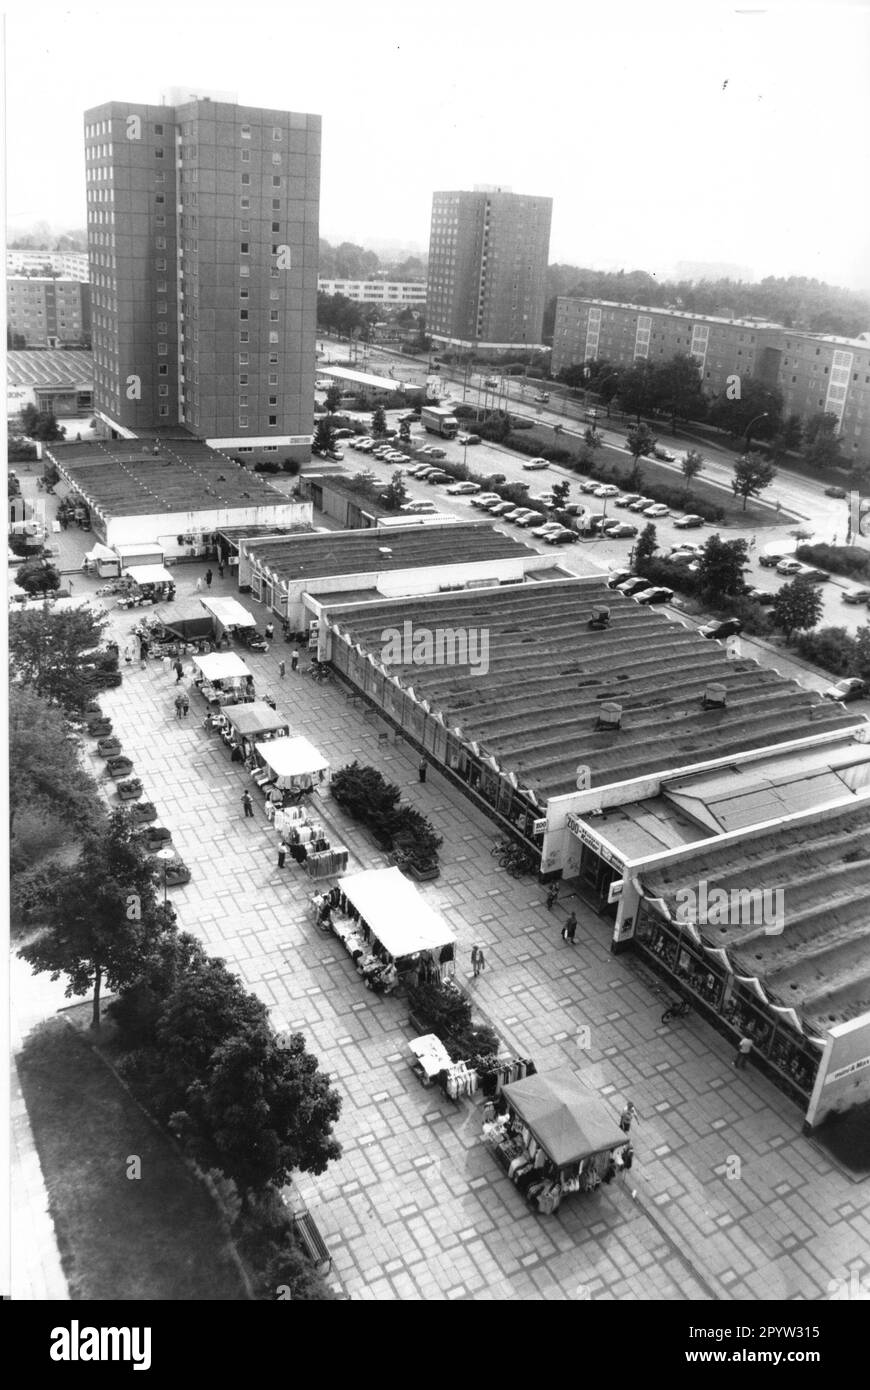 Potsdam in 1995 residential area Am Stern with shopping arcade stalls grocer's trolleys stalls department store high-rise building prefabricated slab apartments shopping Photo: MAZ/Bernd Gartenschläger [automated translation] Stock Photo